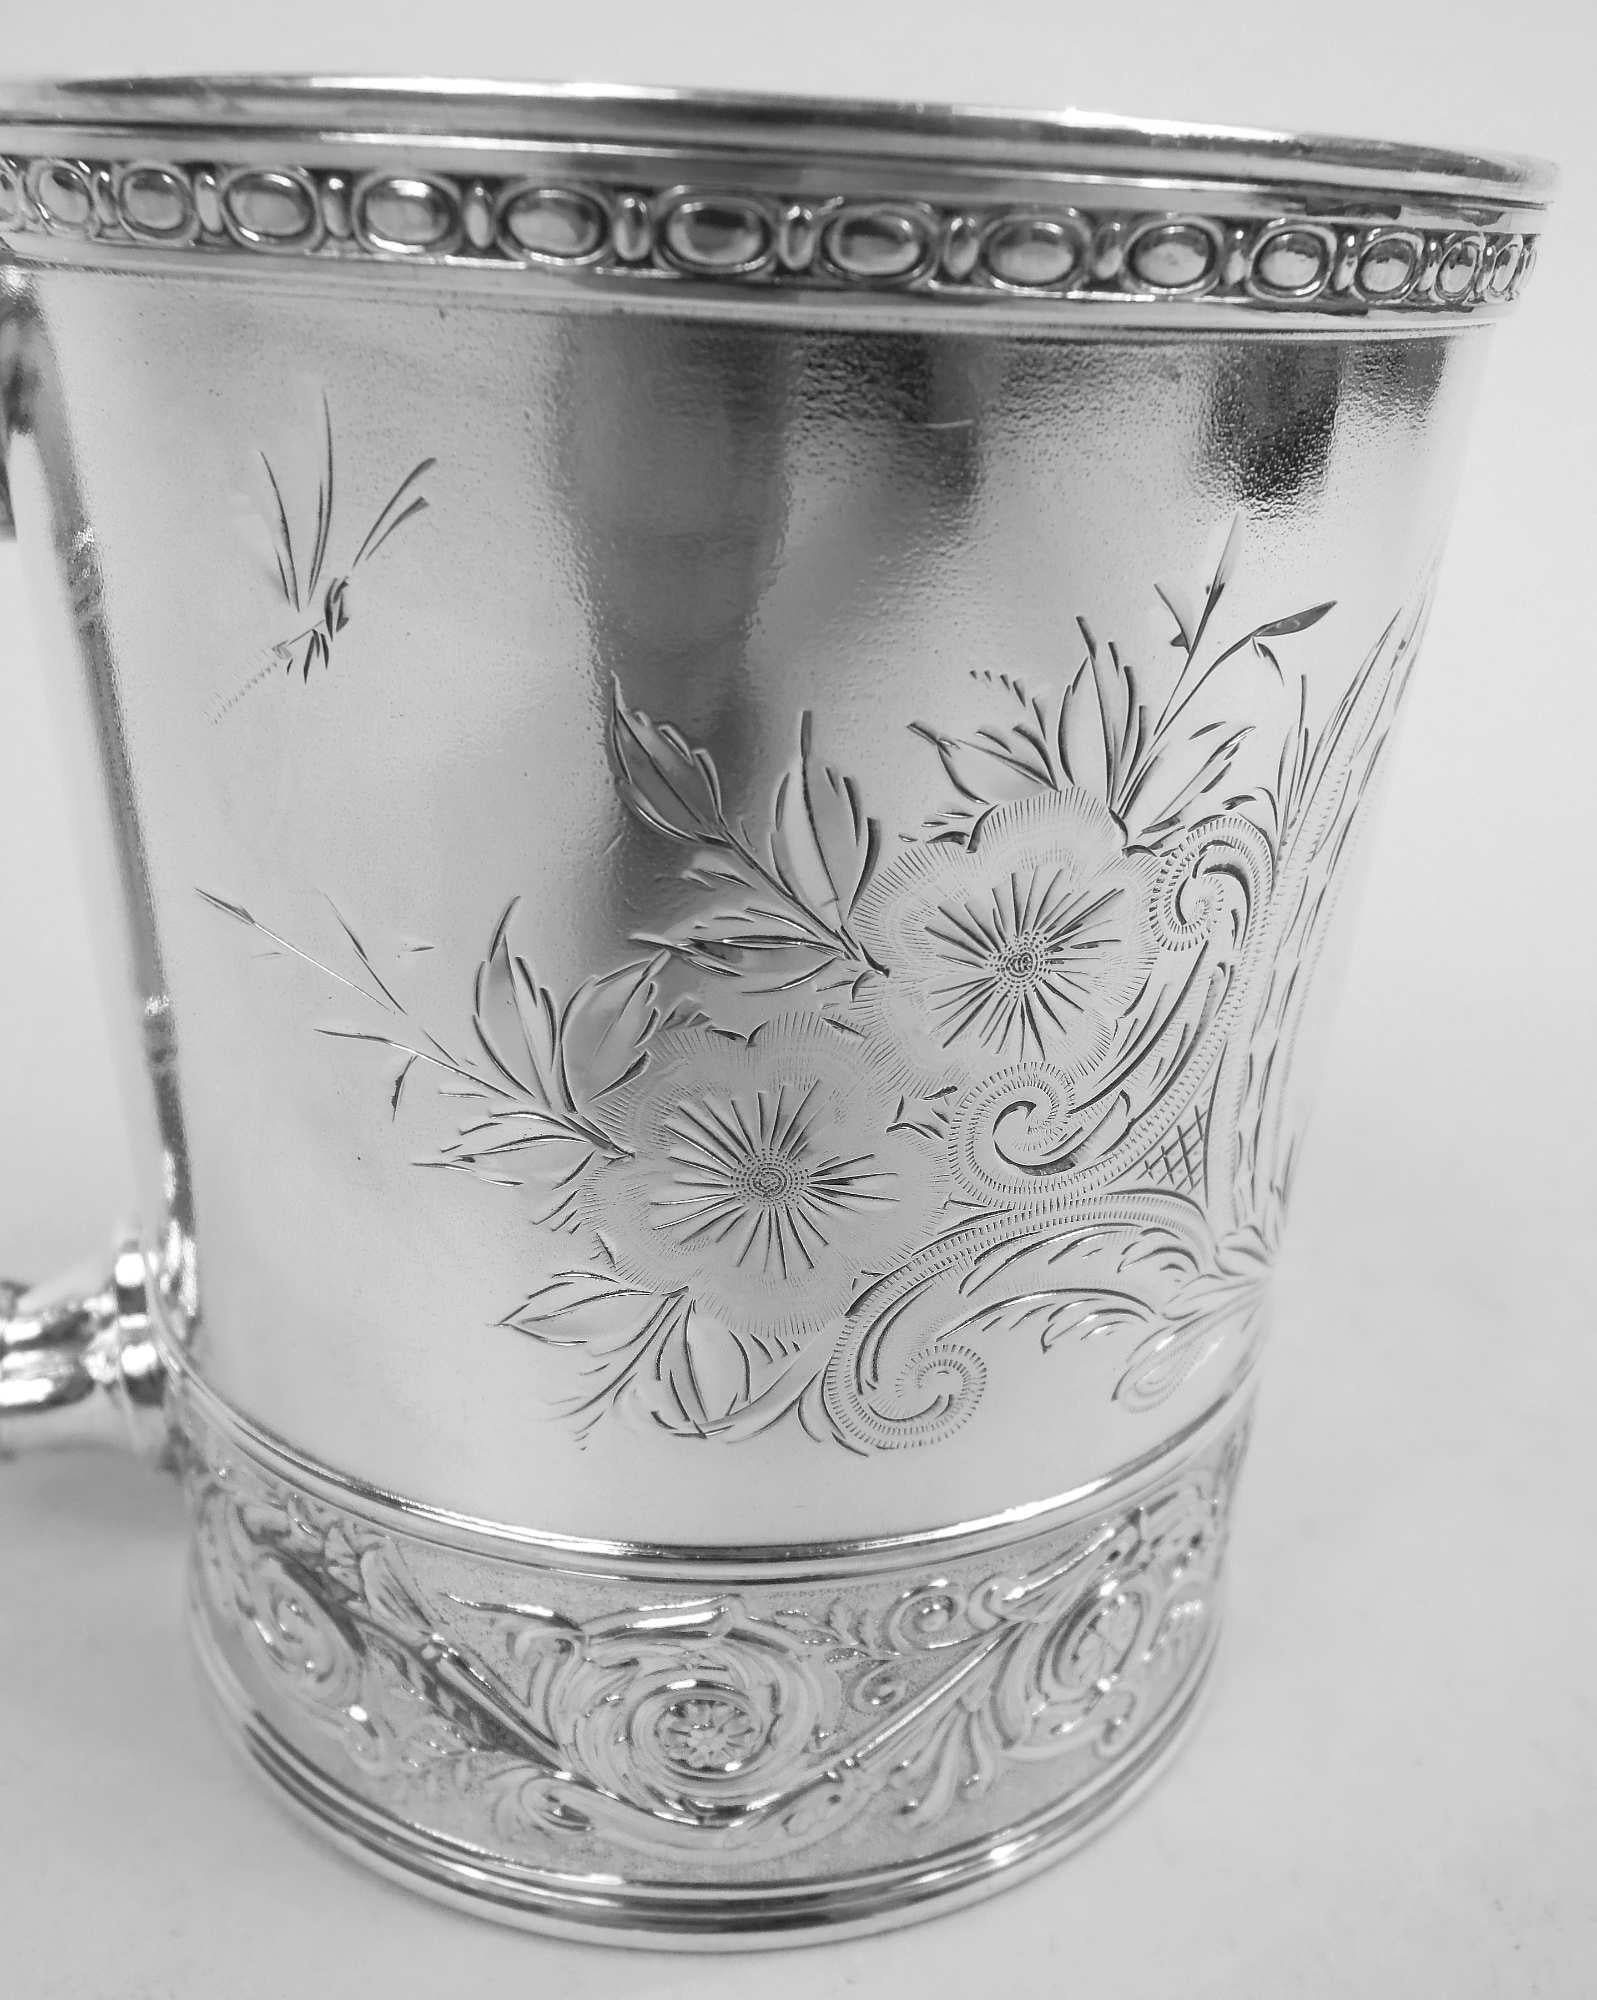 Antique Gorham Victorian Classical Sterling Silver Baby Cup 1888 For Sale 2